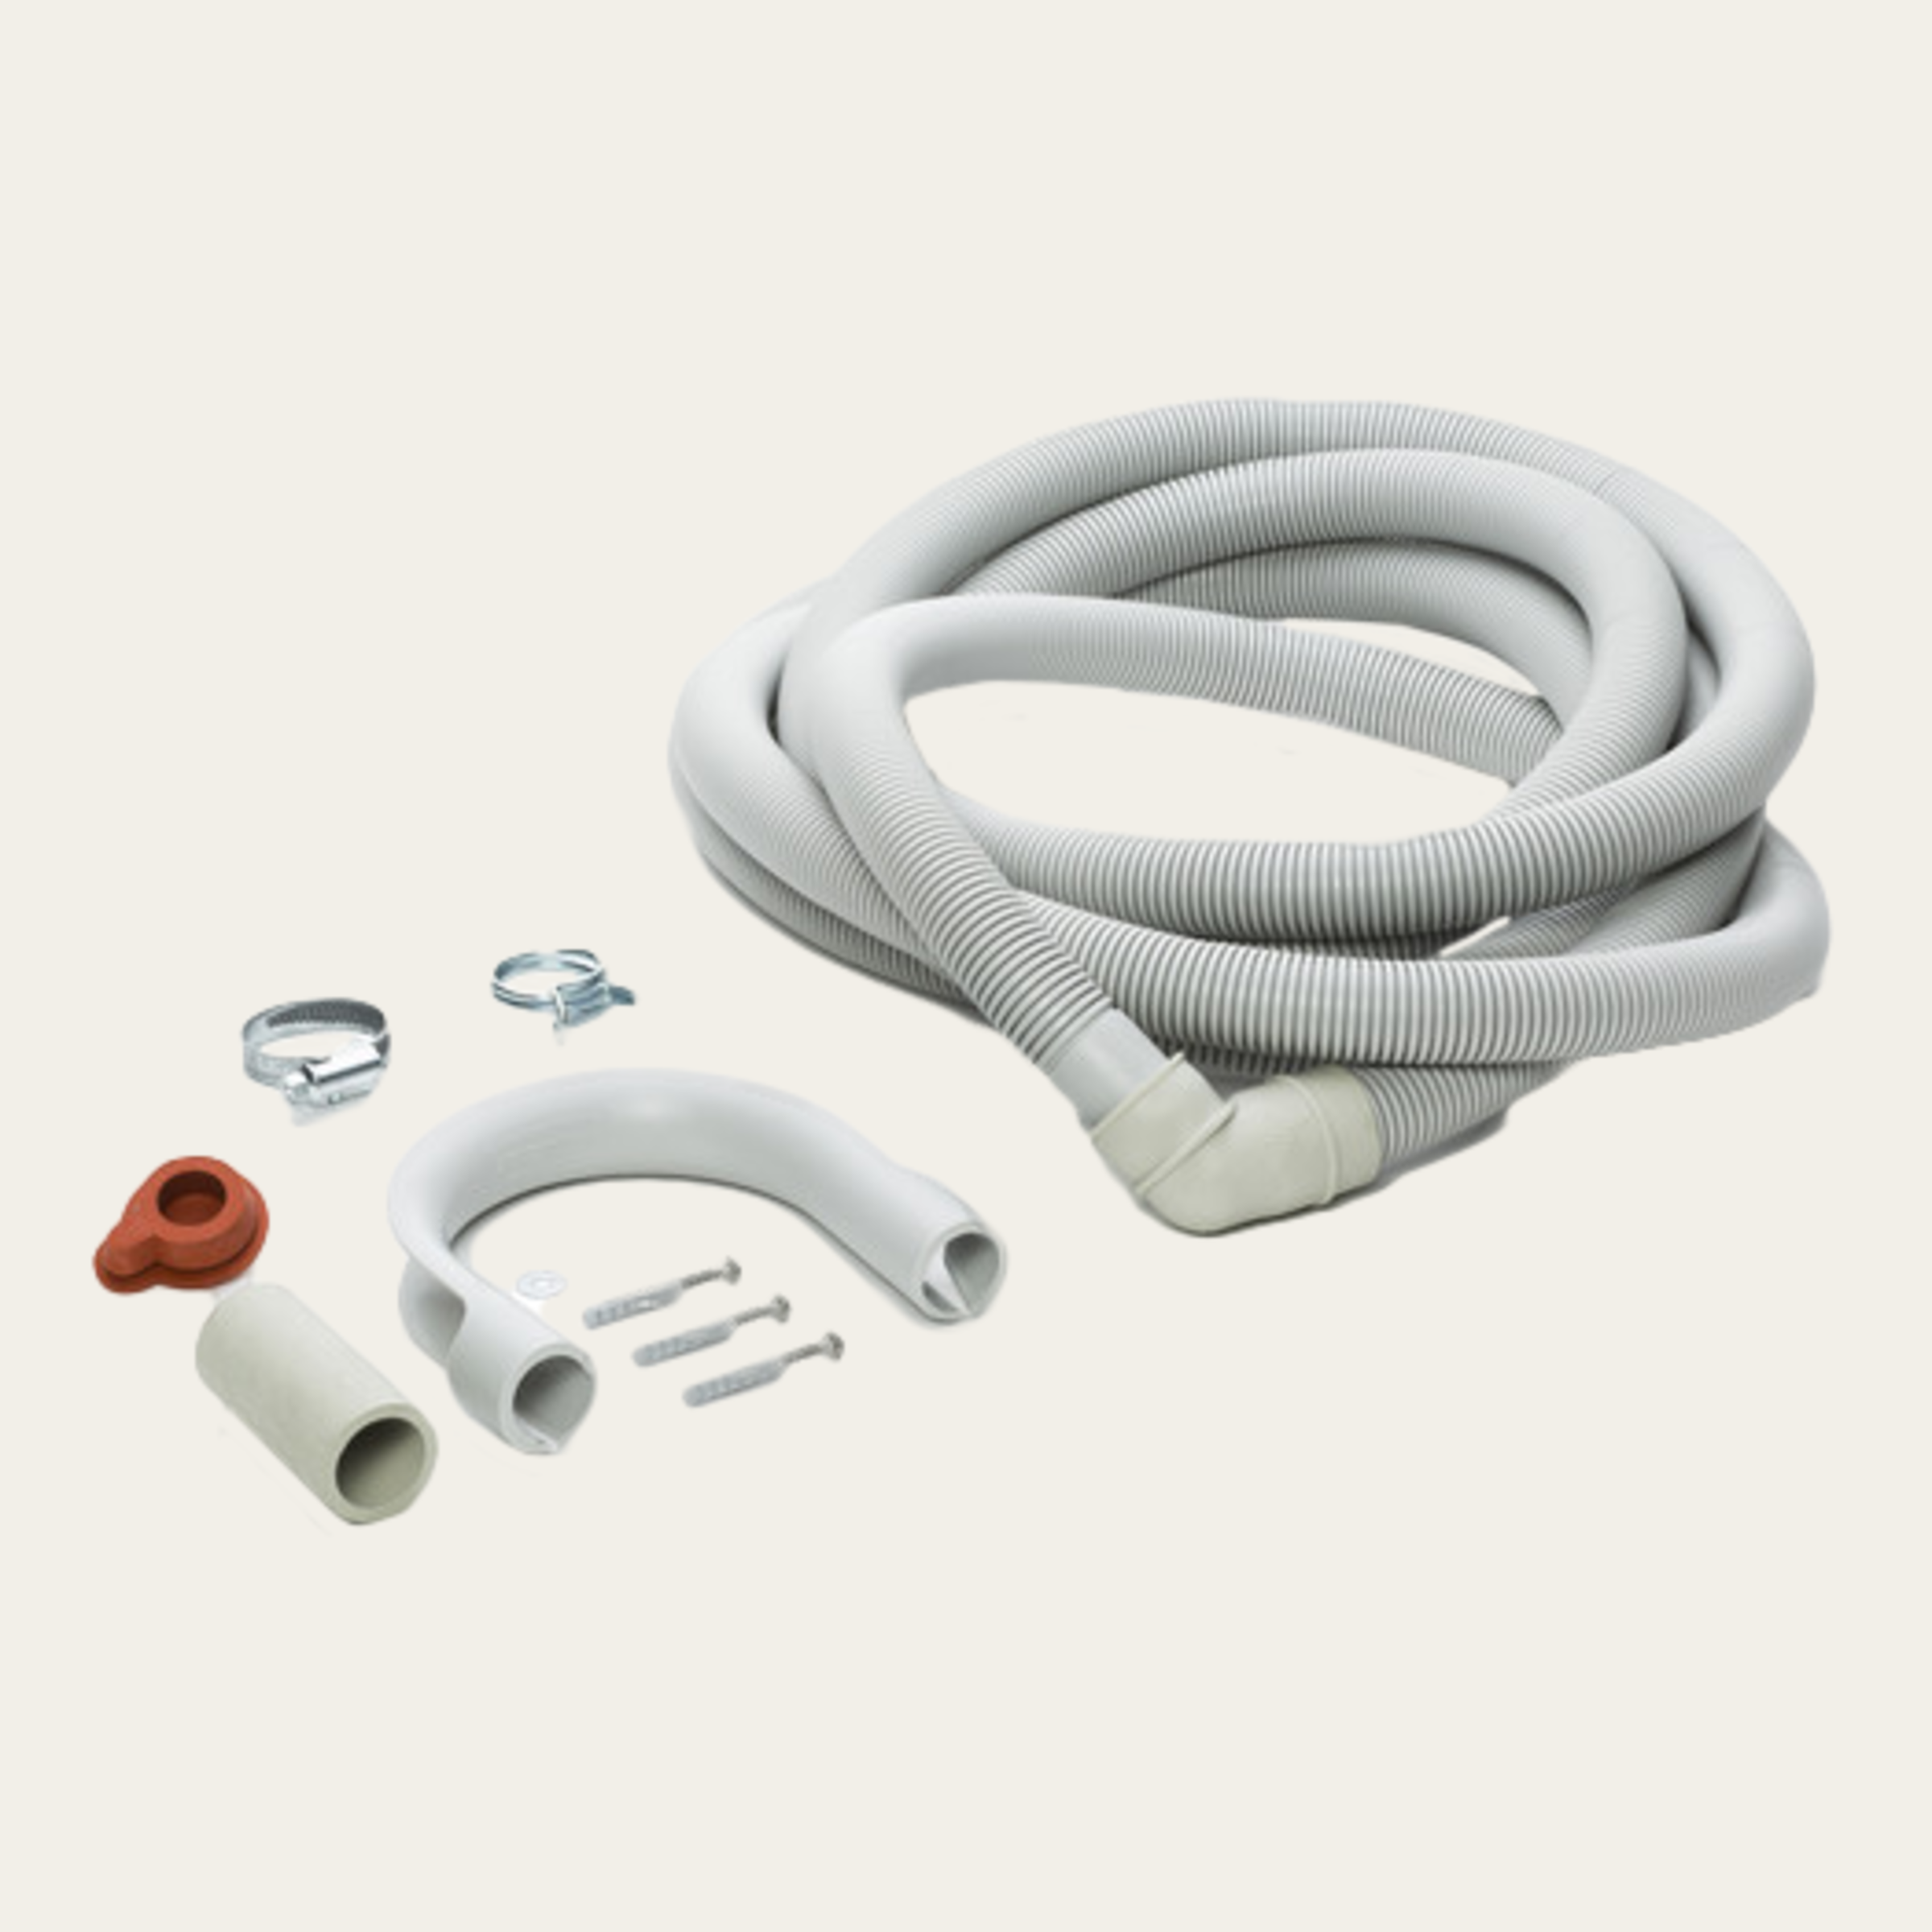 Drain hose, 4 m (can be cut to length)